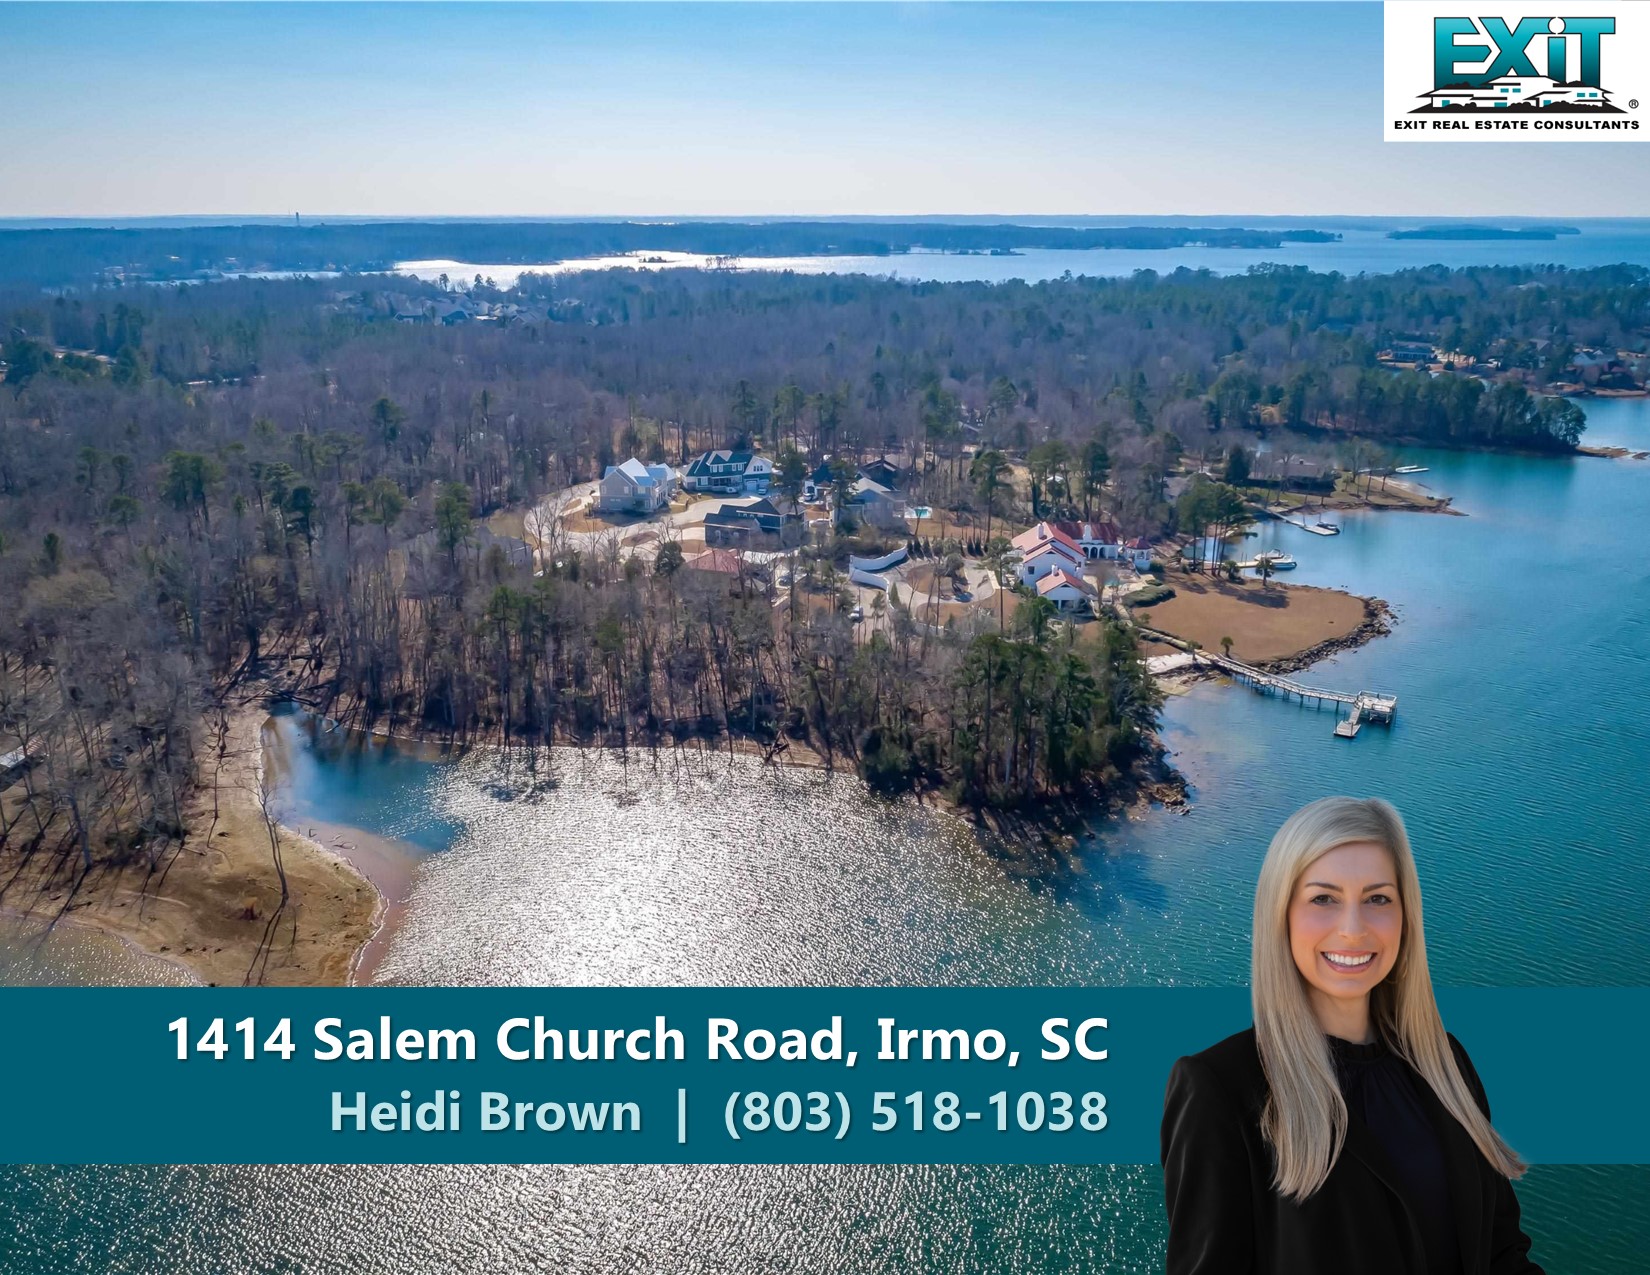 Just listed on Lake Murray - Irmo